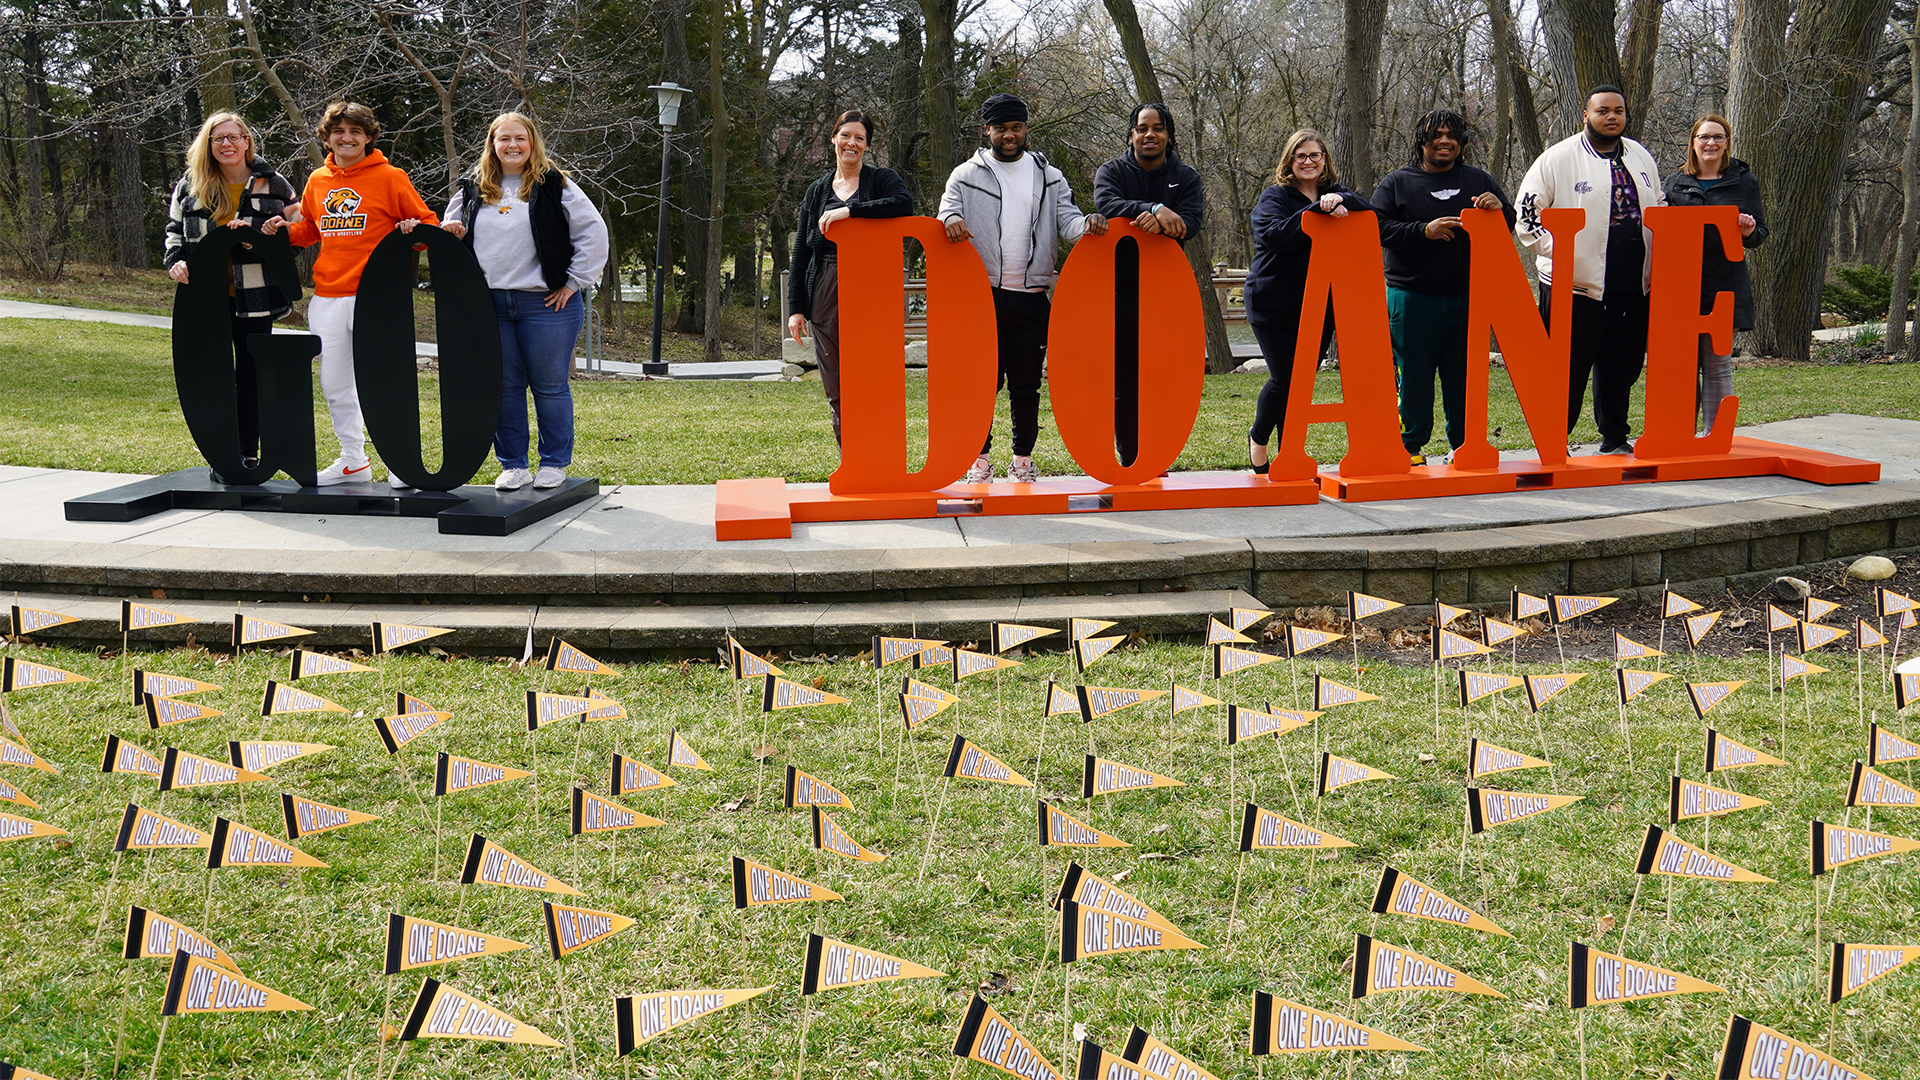 10 people, five Doane staff members, and five students, pose in front of large letters that read G-O D-O-A-N-E. The letters are black and orange and are raised on the stage of Cassel Outdoor Theatre. In front of the stage are many orange pennants on sticks that have been placed in the green grass and read “One Doane,” a nod to the name of the event — One Day. One Doane.